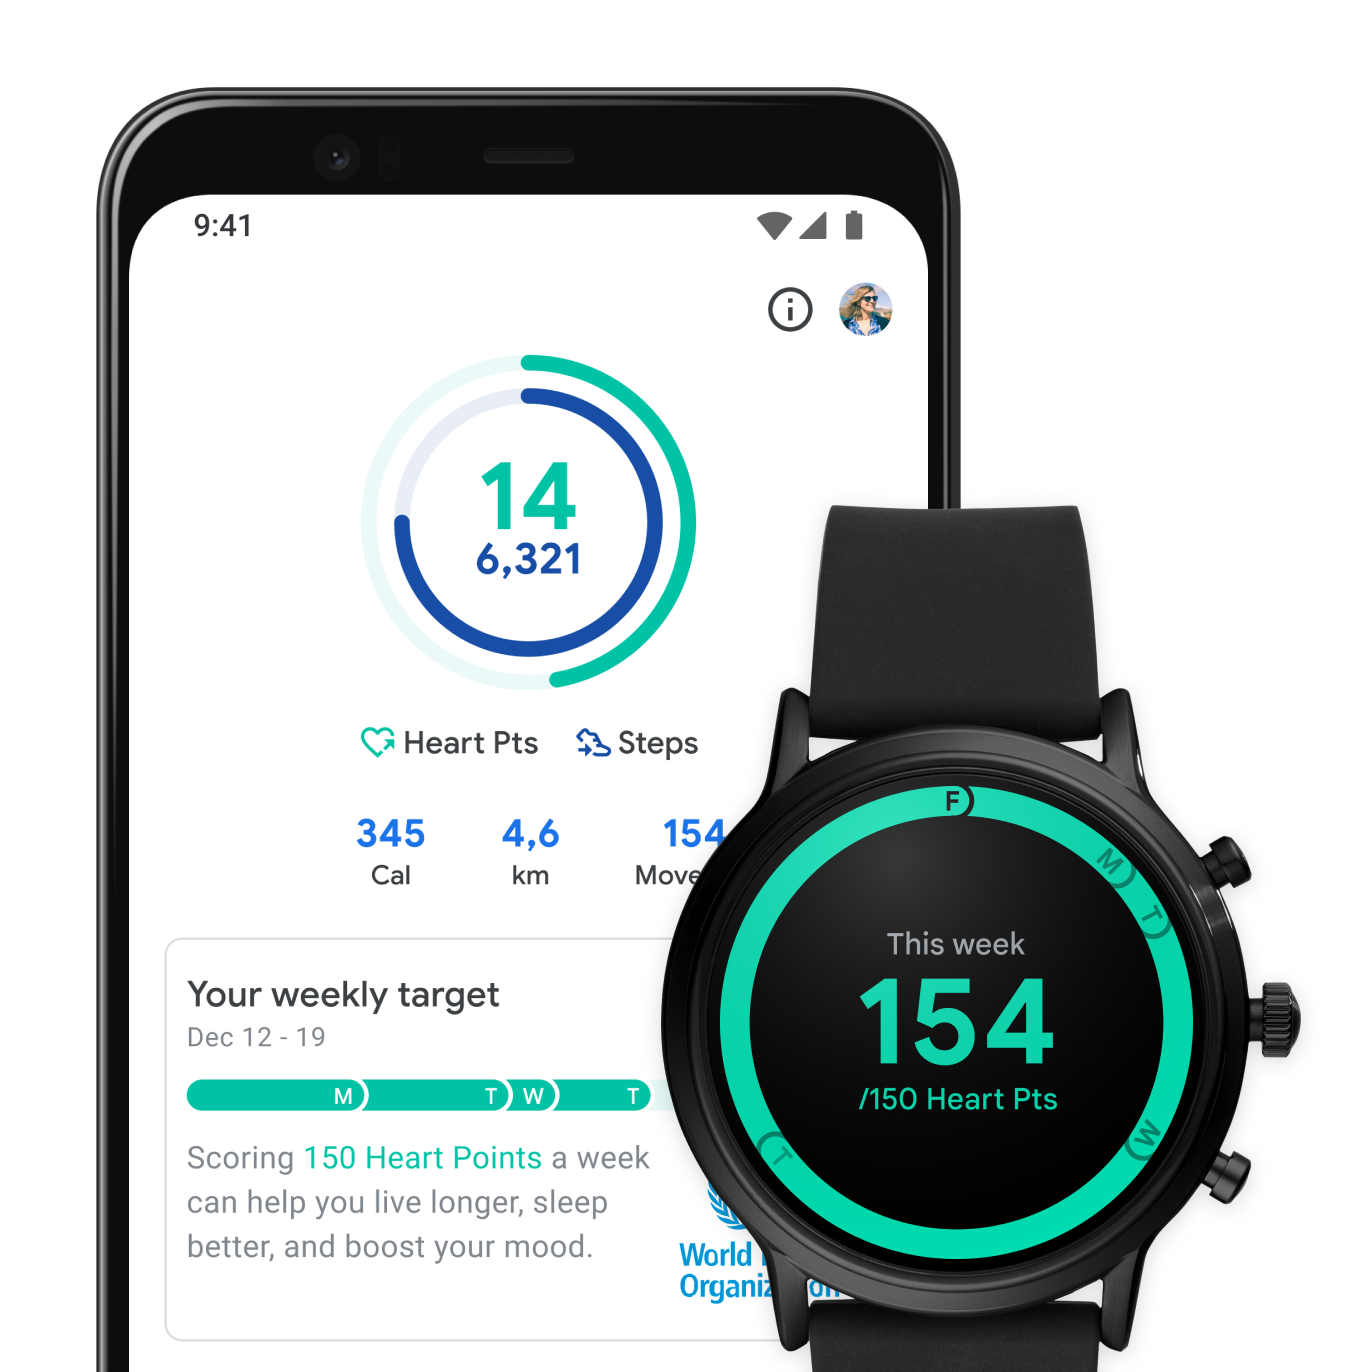 The Google Fit app gets a useful update with new progress tracking feature and a step counter